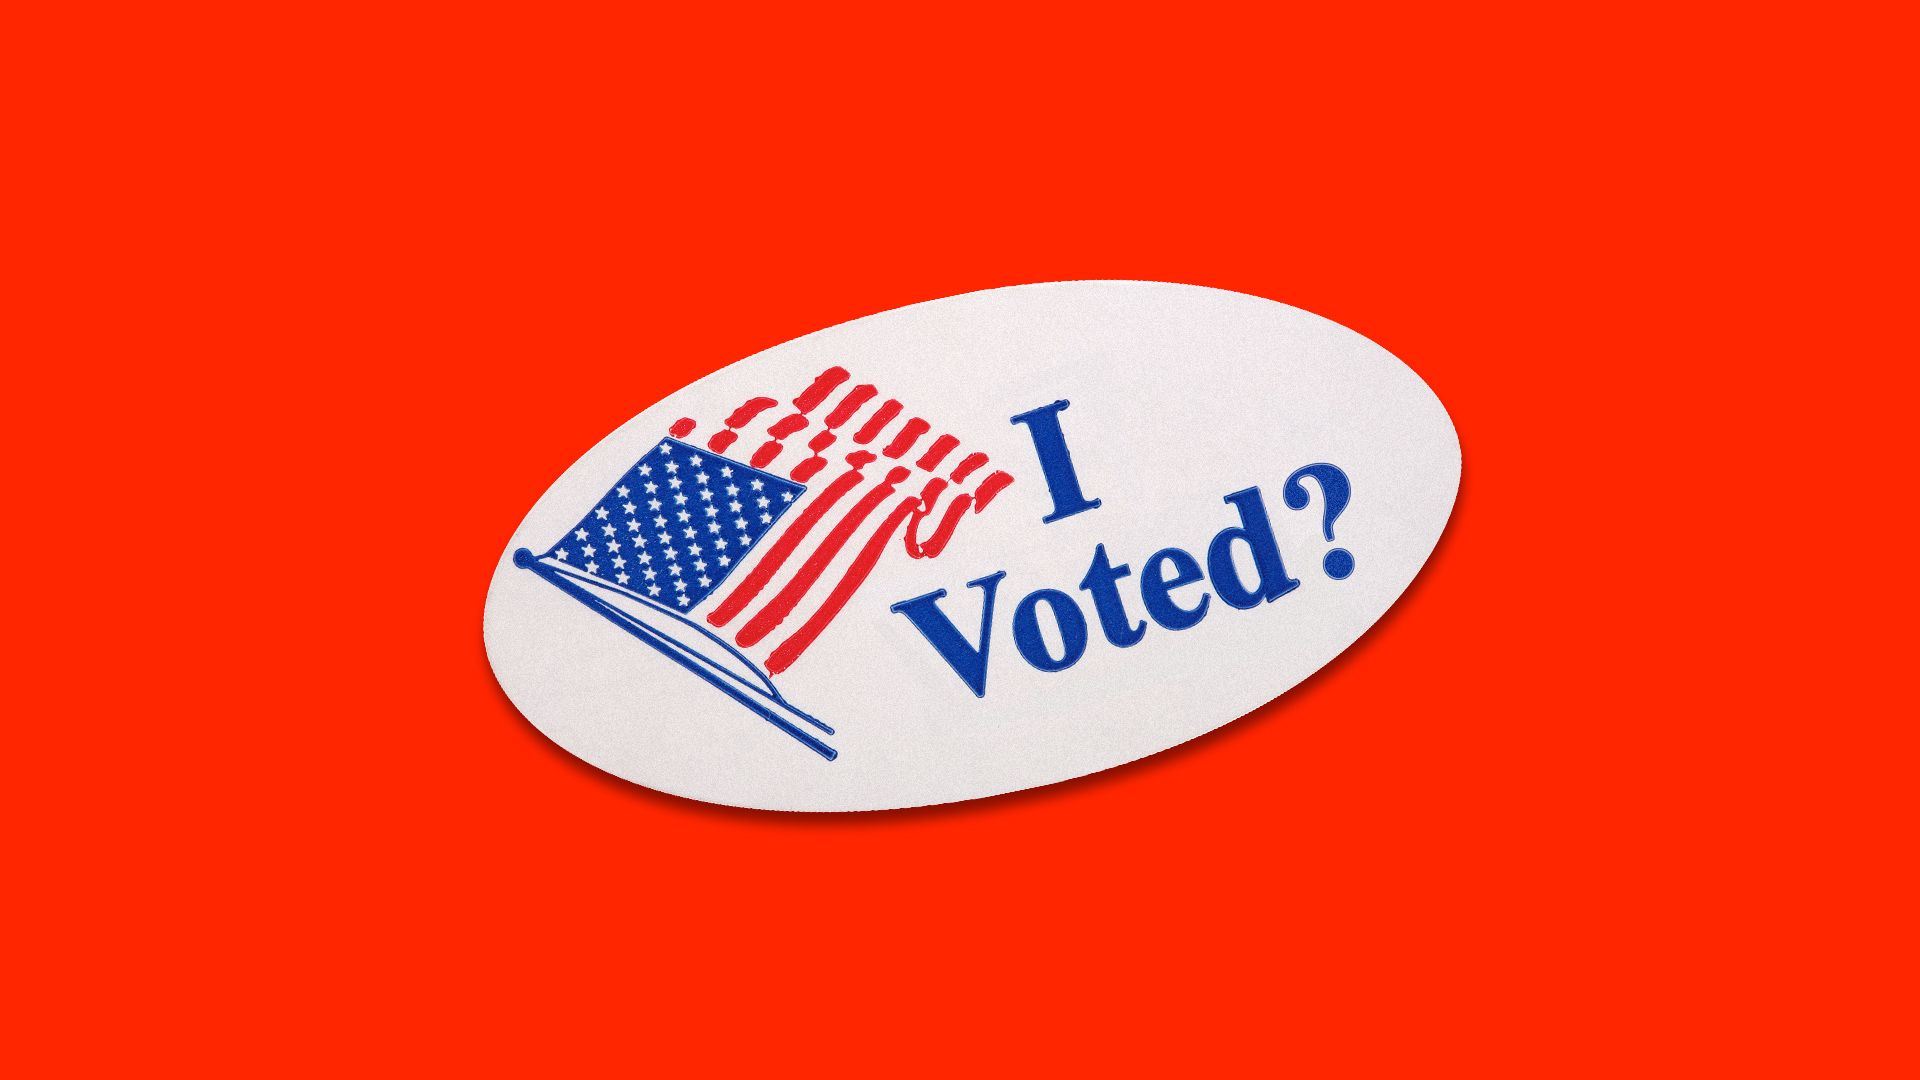 Illustration of an I Voted sticker with a question mark at the end, "I Voted?"